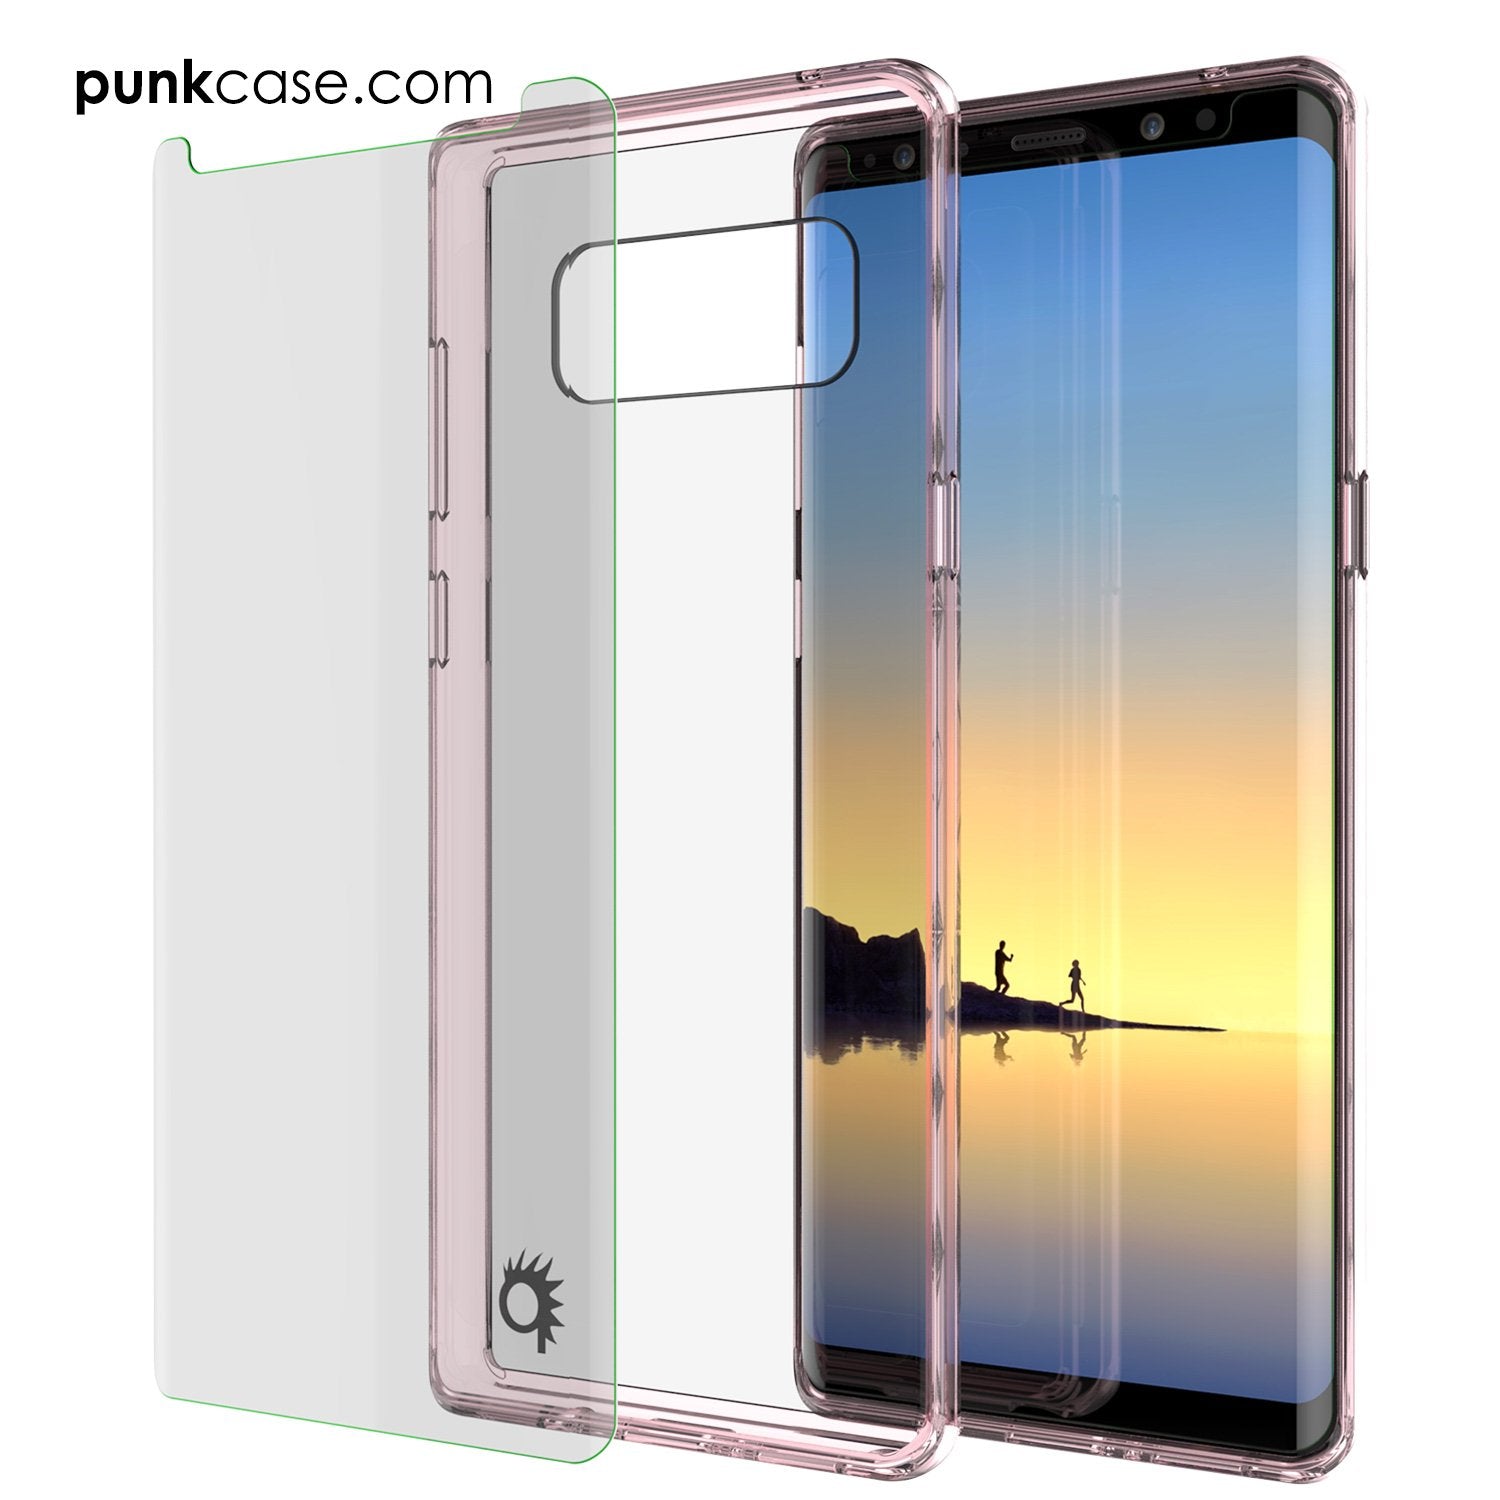 Galaxy Note 8 Case, PUNKcase [LUCID 2.0 Series] [Slim Fit] Armor Cover w/Integrated Anti-Shock System & PUNKSHIELD Screen Protector [Crystal Pink] - PunkCase NZ